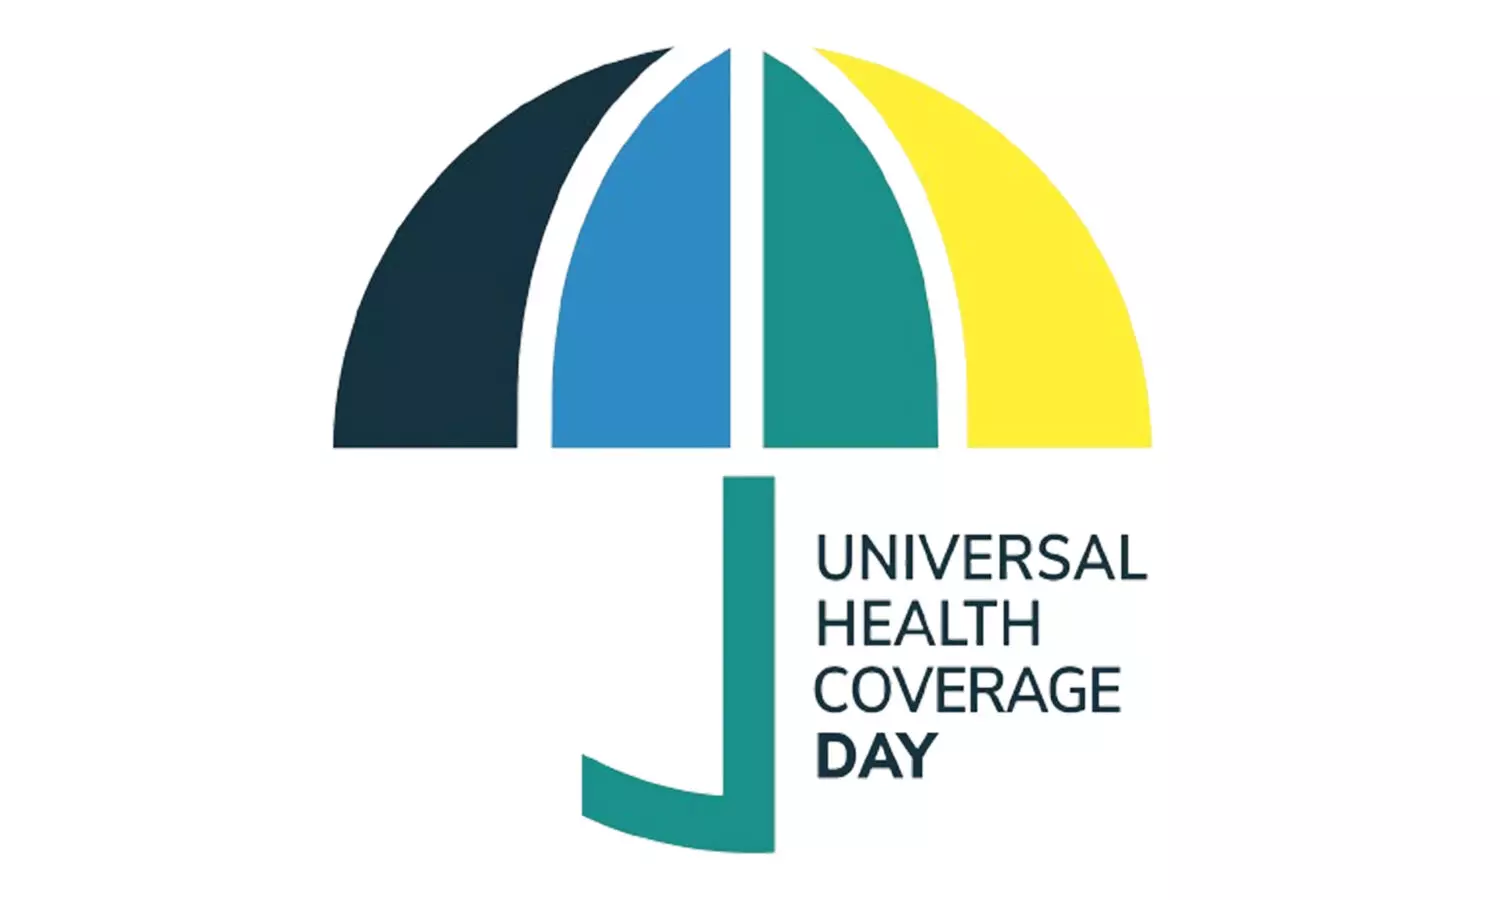 Aiming towards International Universal health coverage by 2030: Focusing on Kidney Health